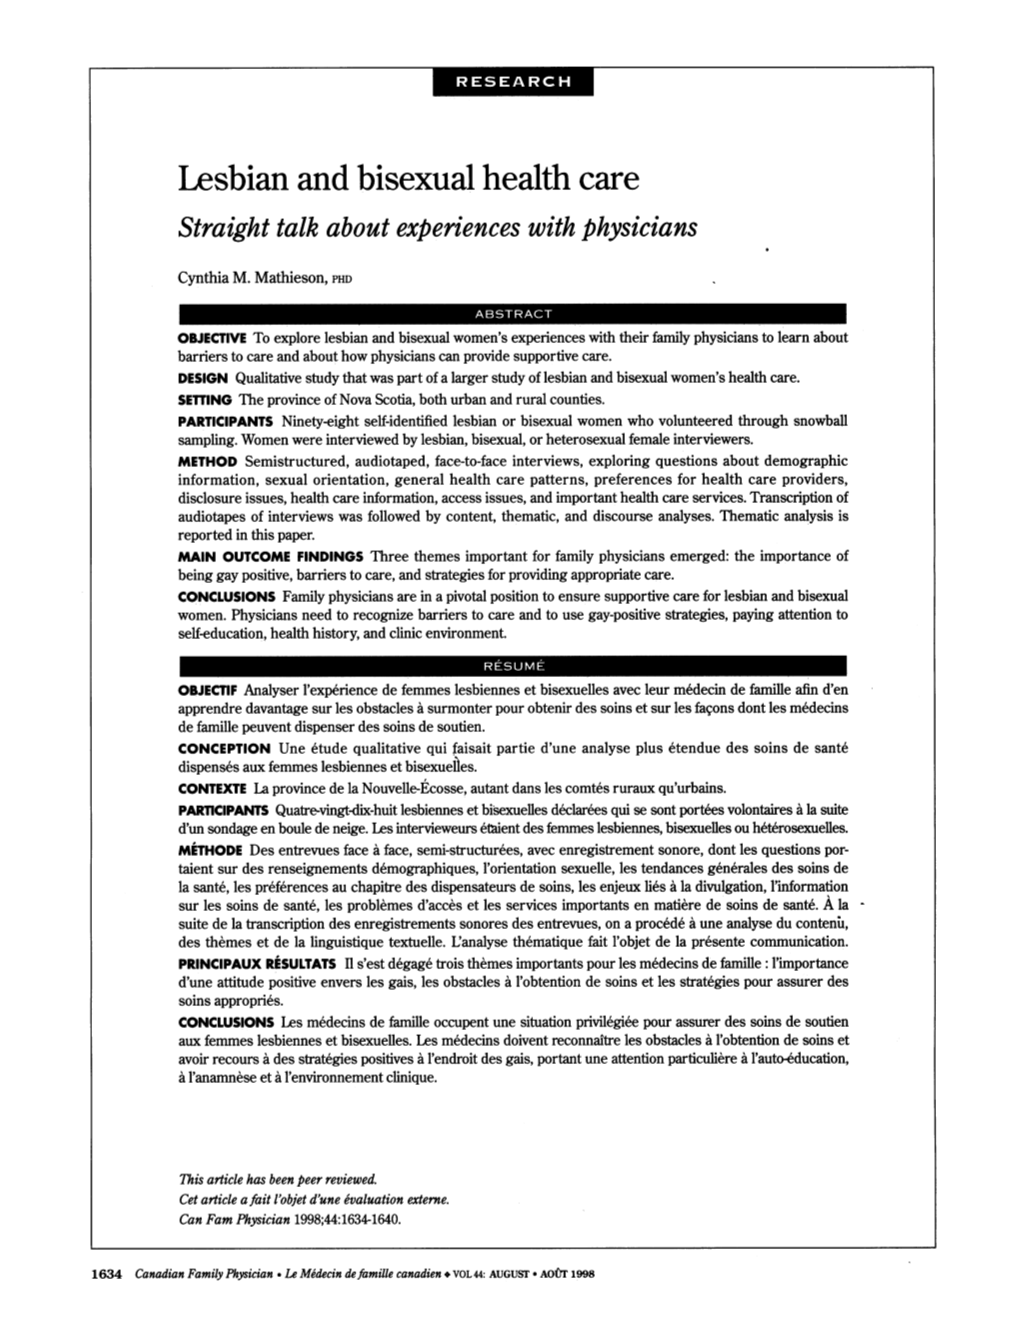 Lesbian and Bisexual Health Care Straight Talk About Experiences with Physicians